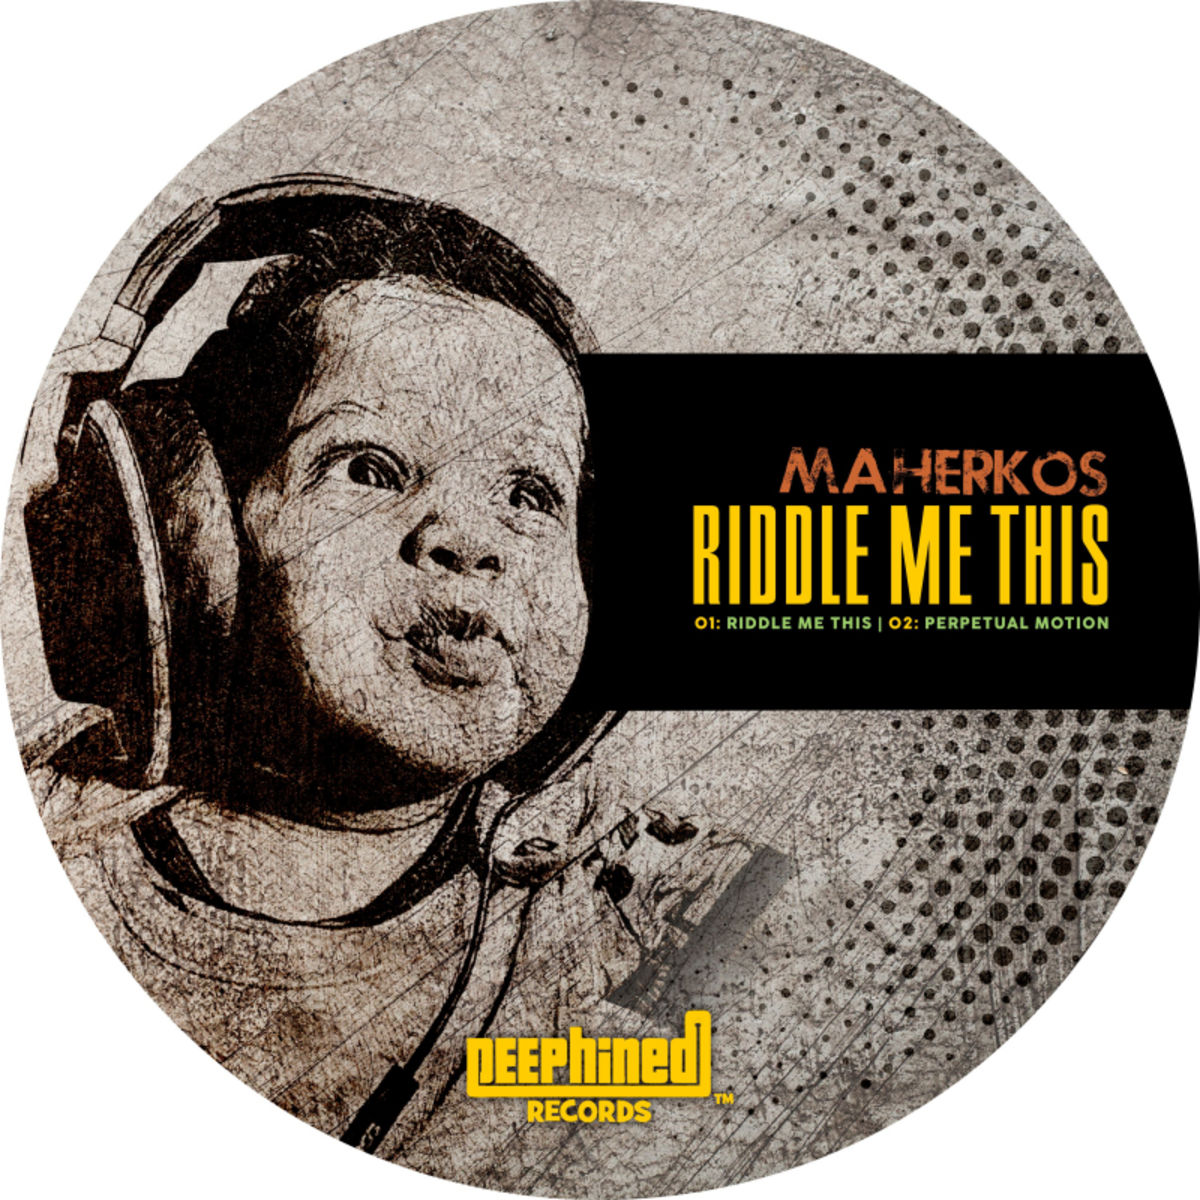 Maherkos - Riddle Me This / Deephined Records